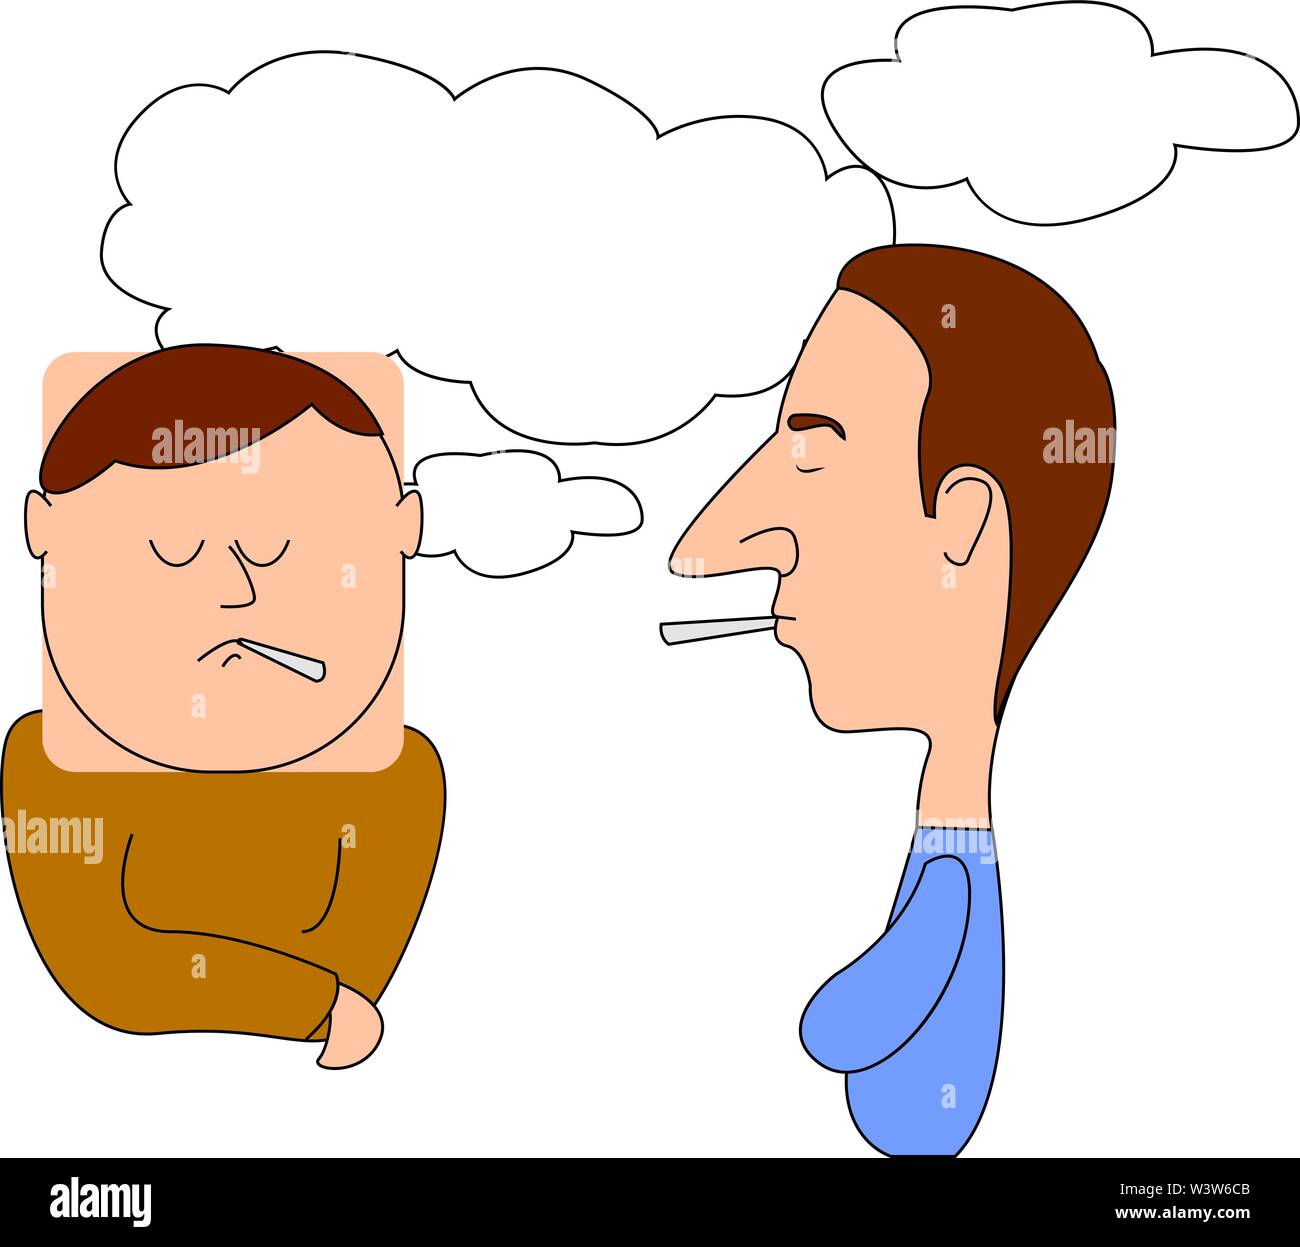 People smoking, illustration, vector on white background. Stock Vector